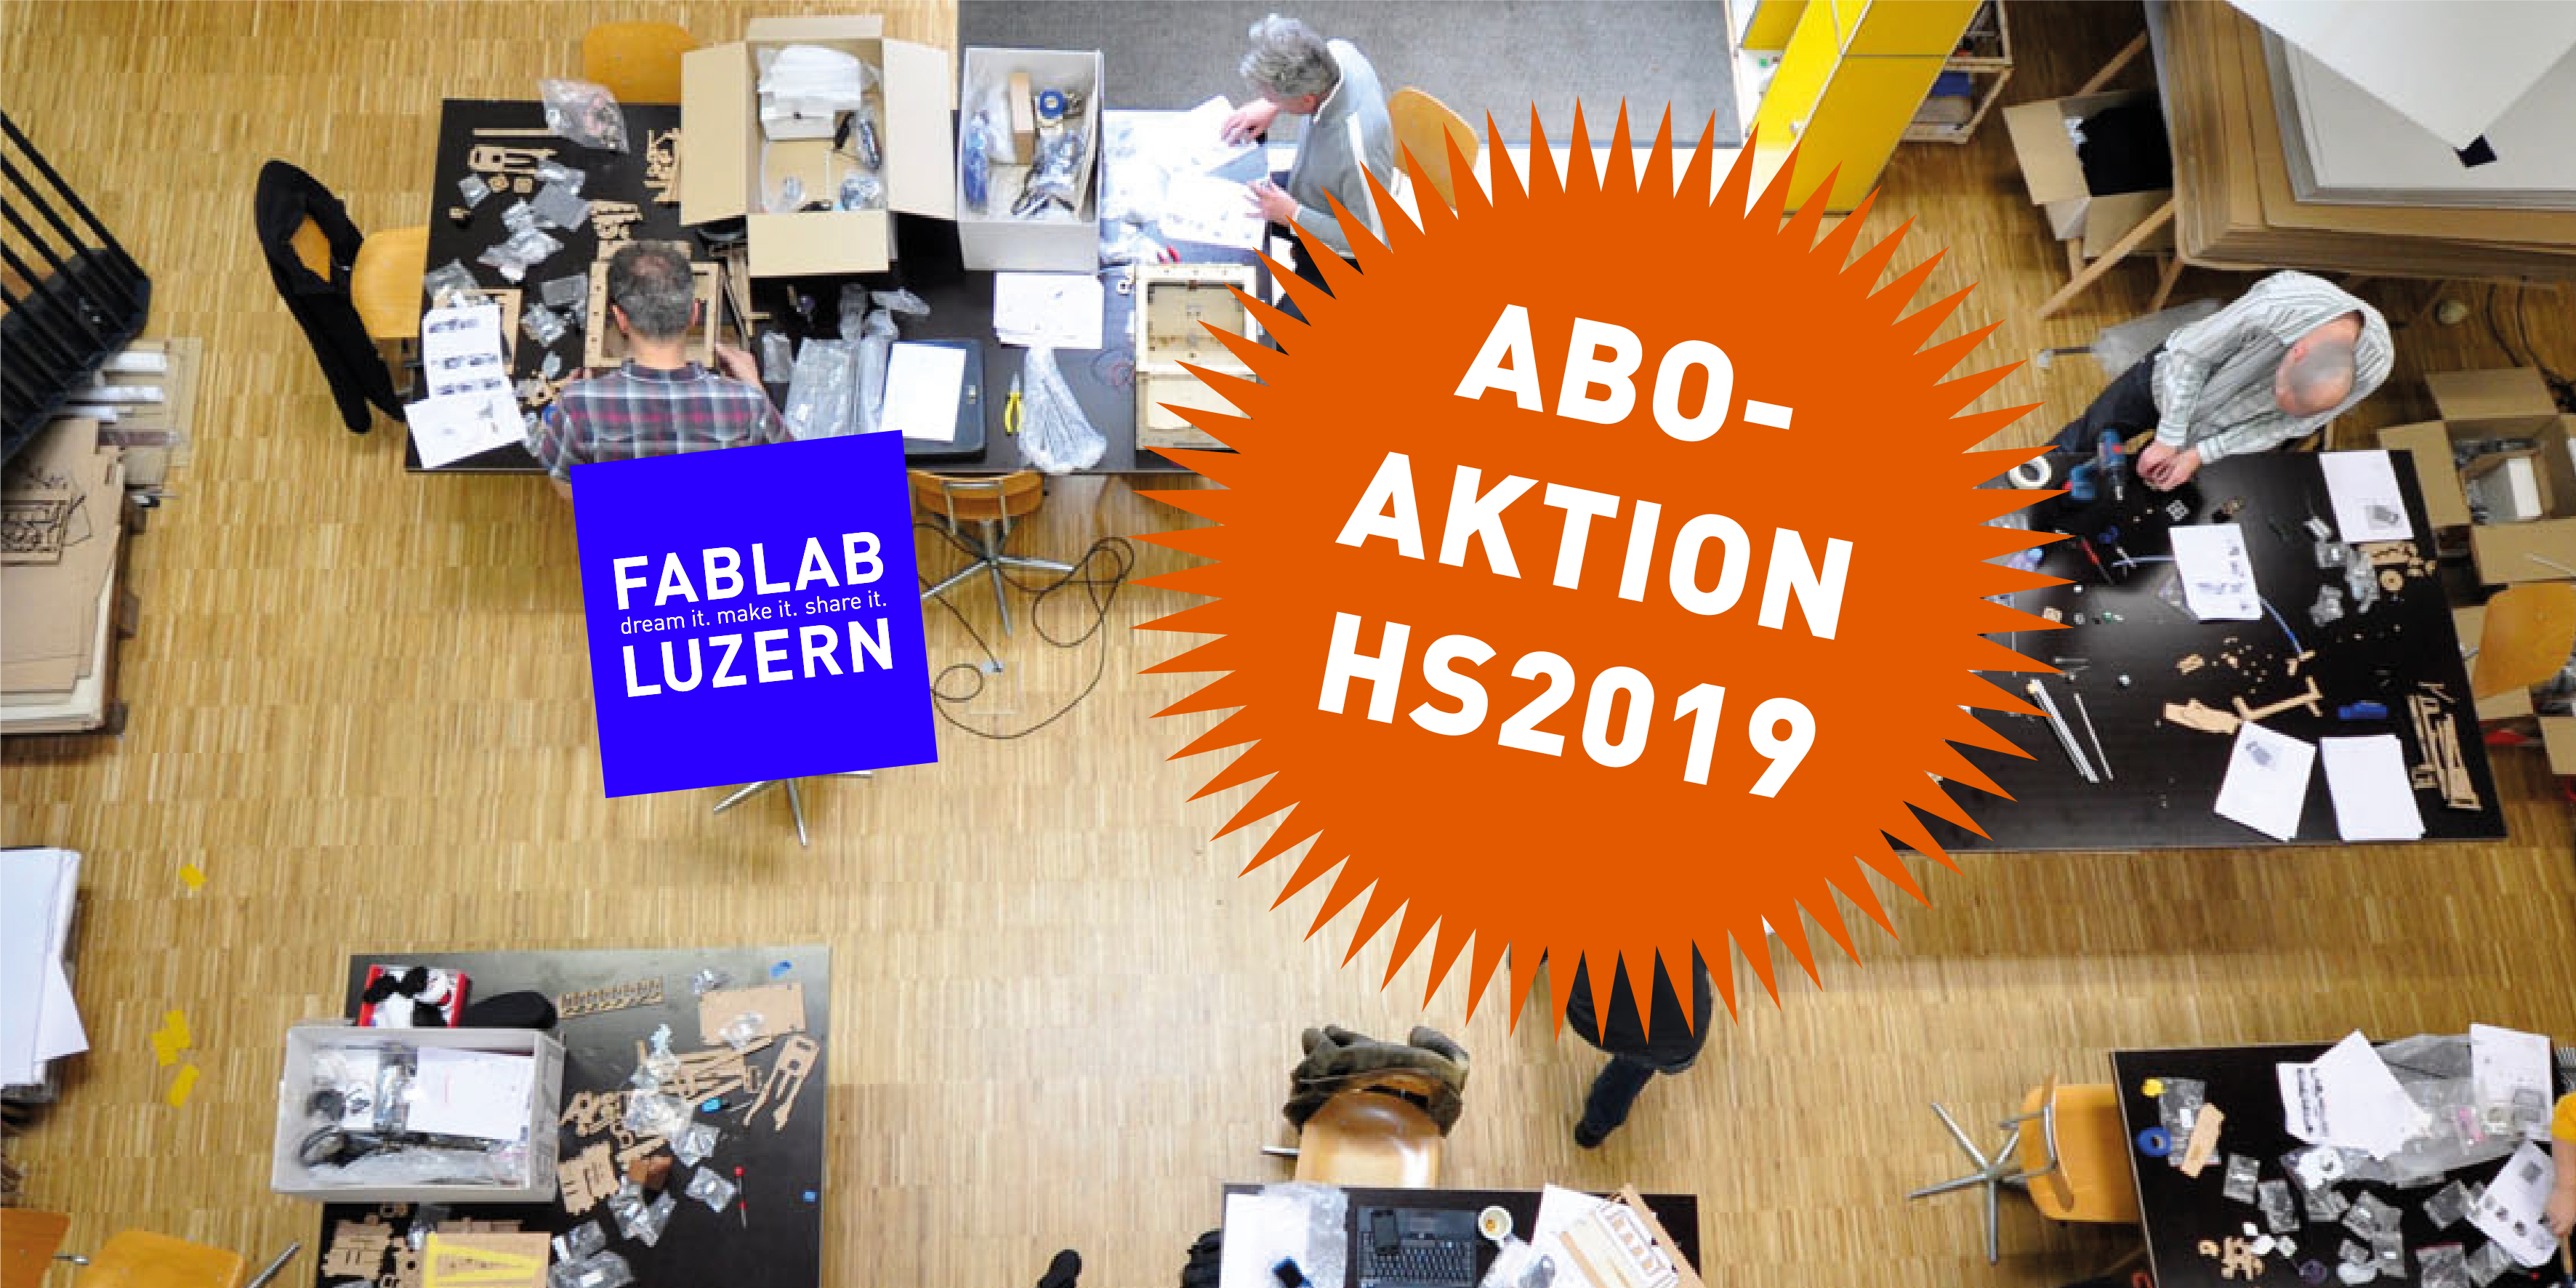 You are currently viewing ABO-AKTION HS2019